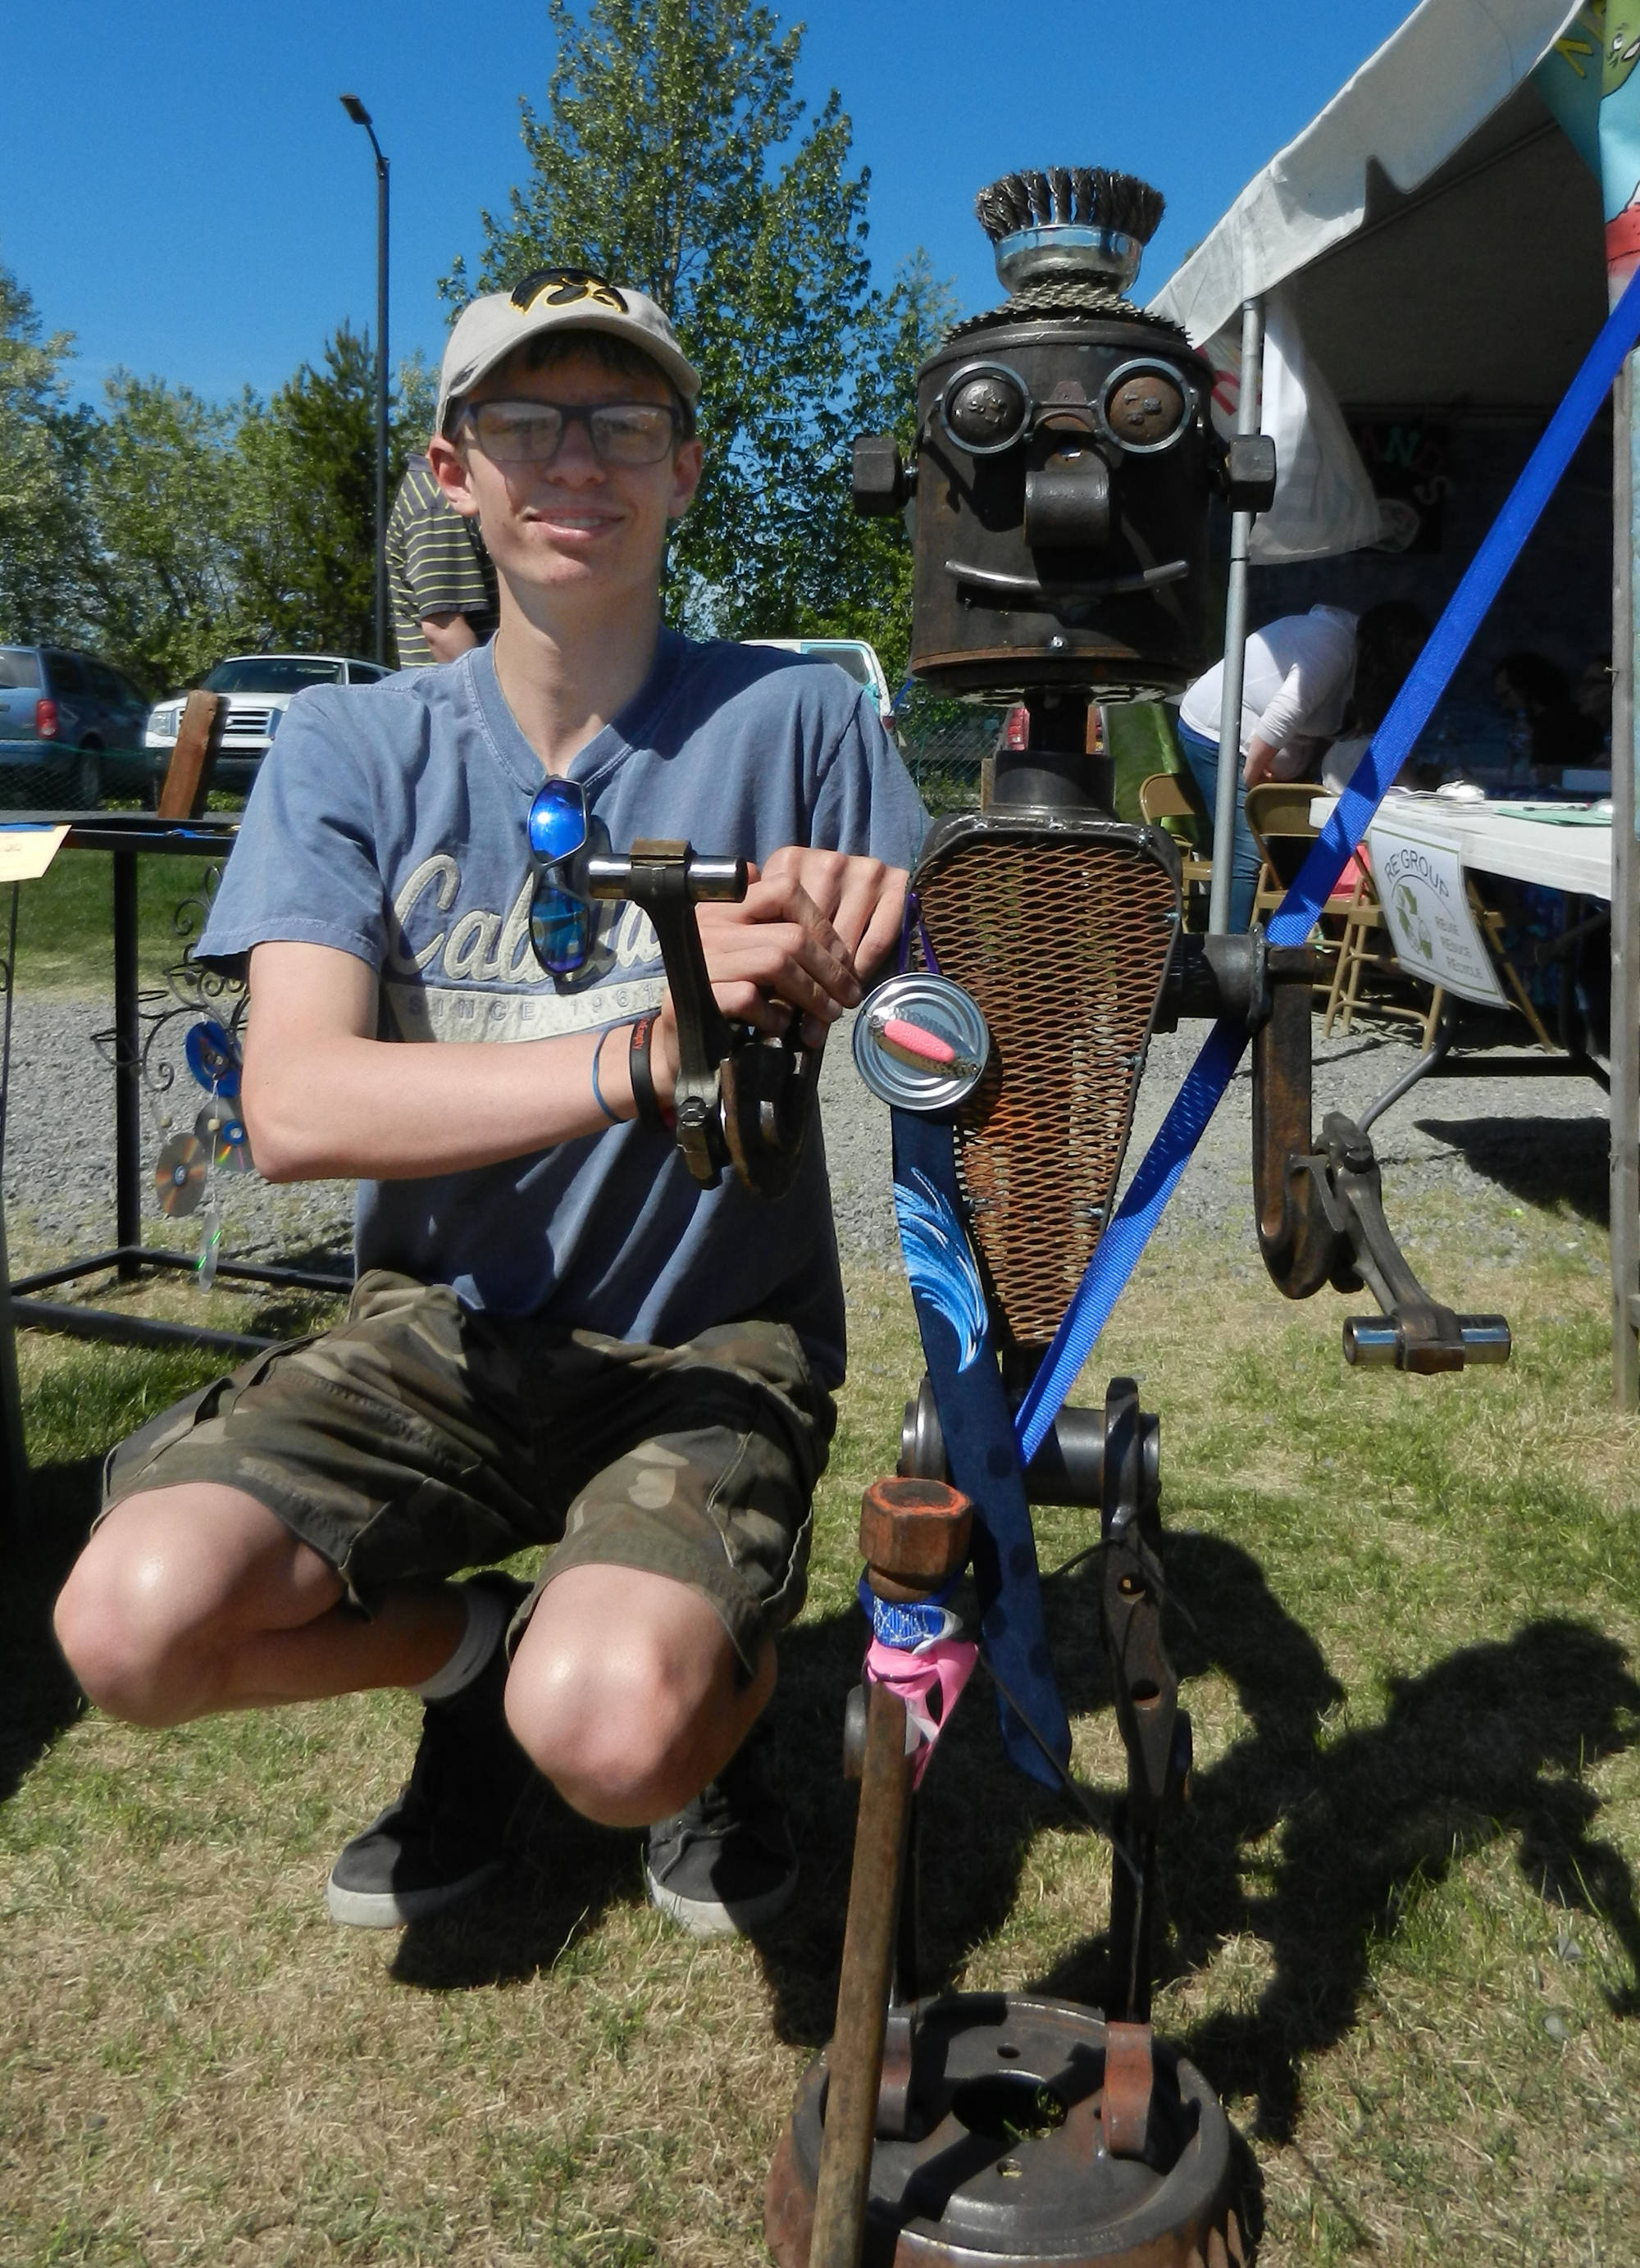 Jake Nabholtz displays his winning youth entry in the large sculpture category at the 2018 Salvage Art Exhibit in the Kenai River Festival. (Photo provided by ReGroup Recycling)